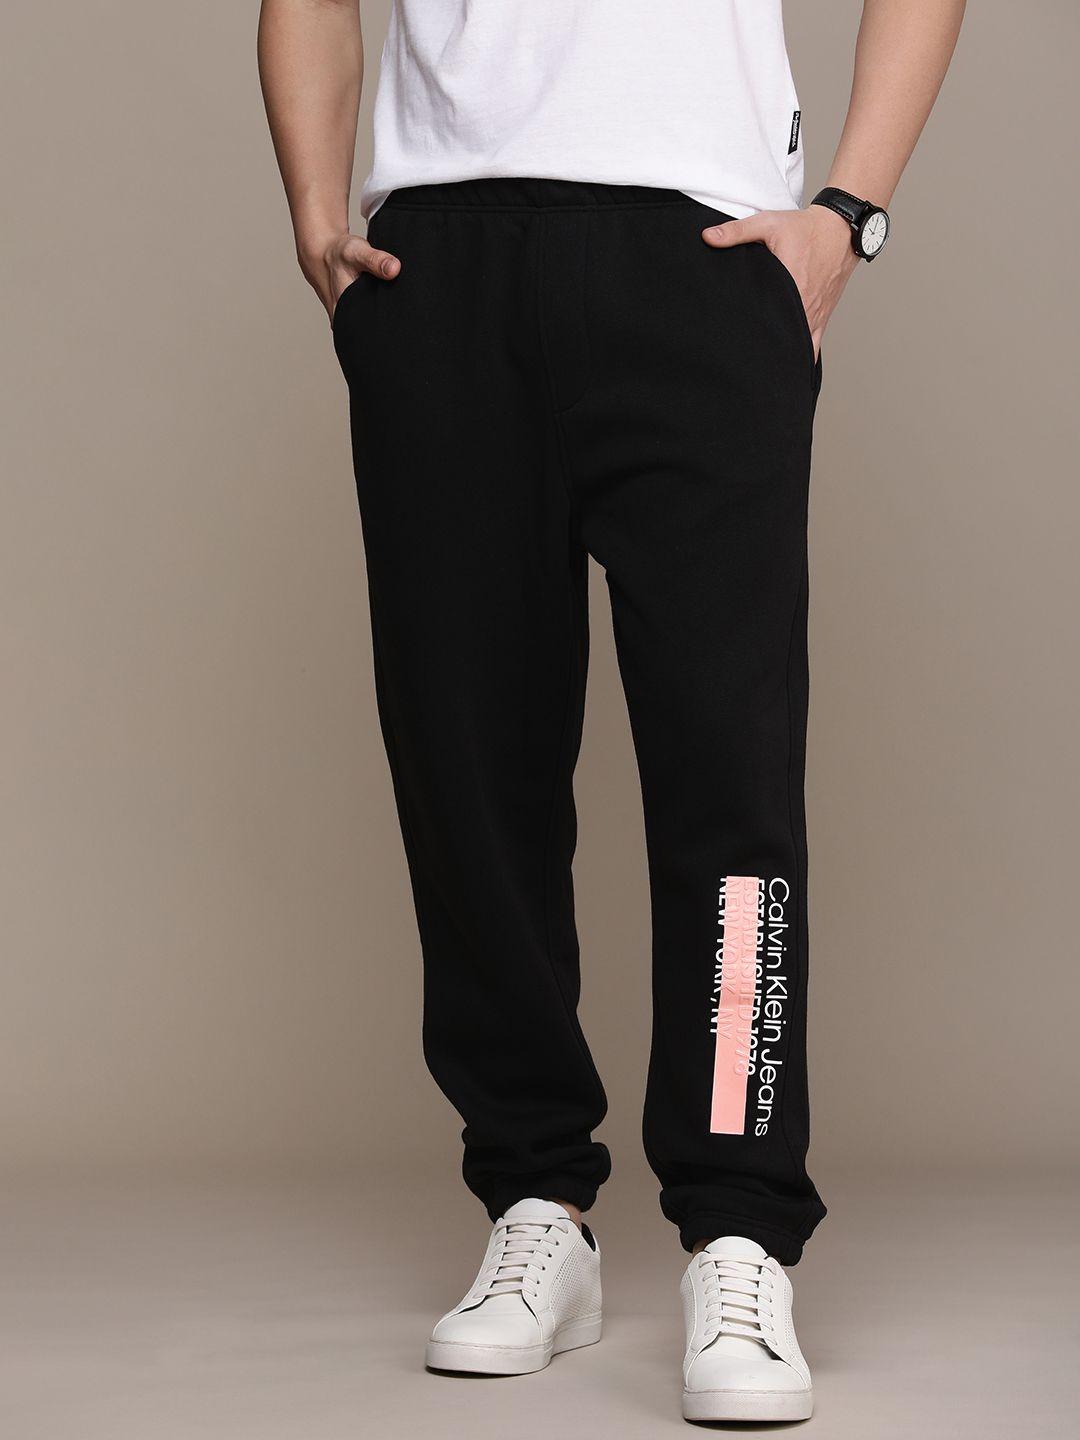 calvin klein jeans men brand logo printed mid-rise relaxed fit joggers track pants